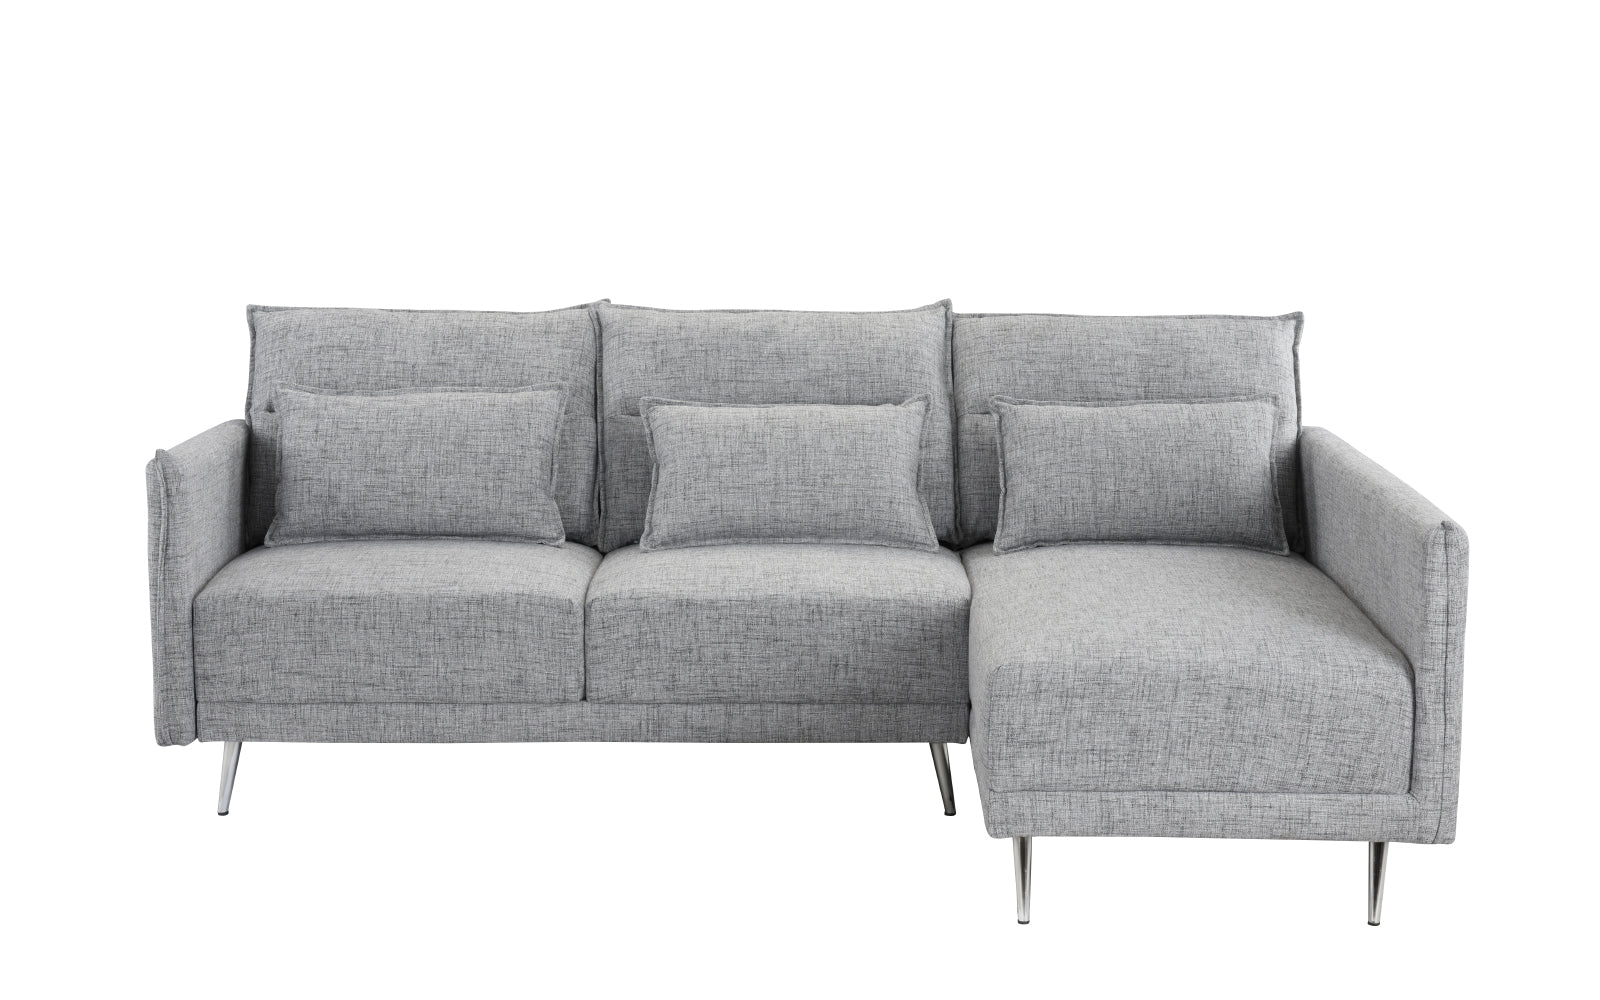 Bowie Mid-century Small Space Sectional